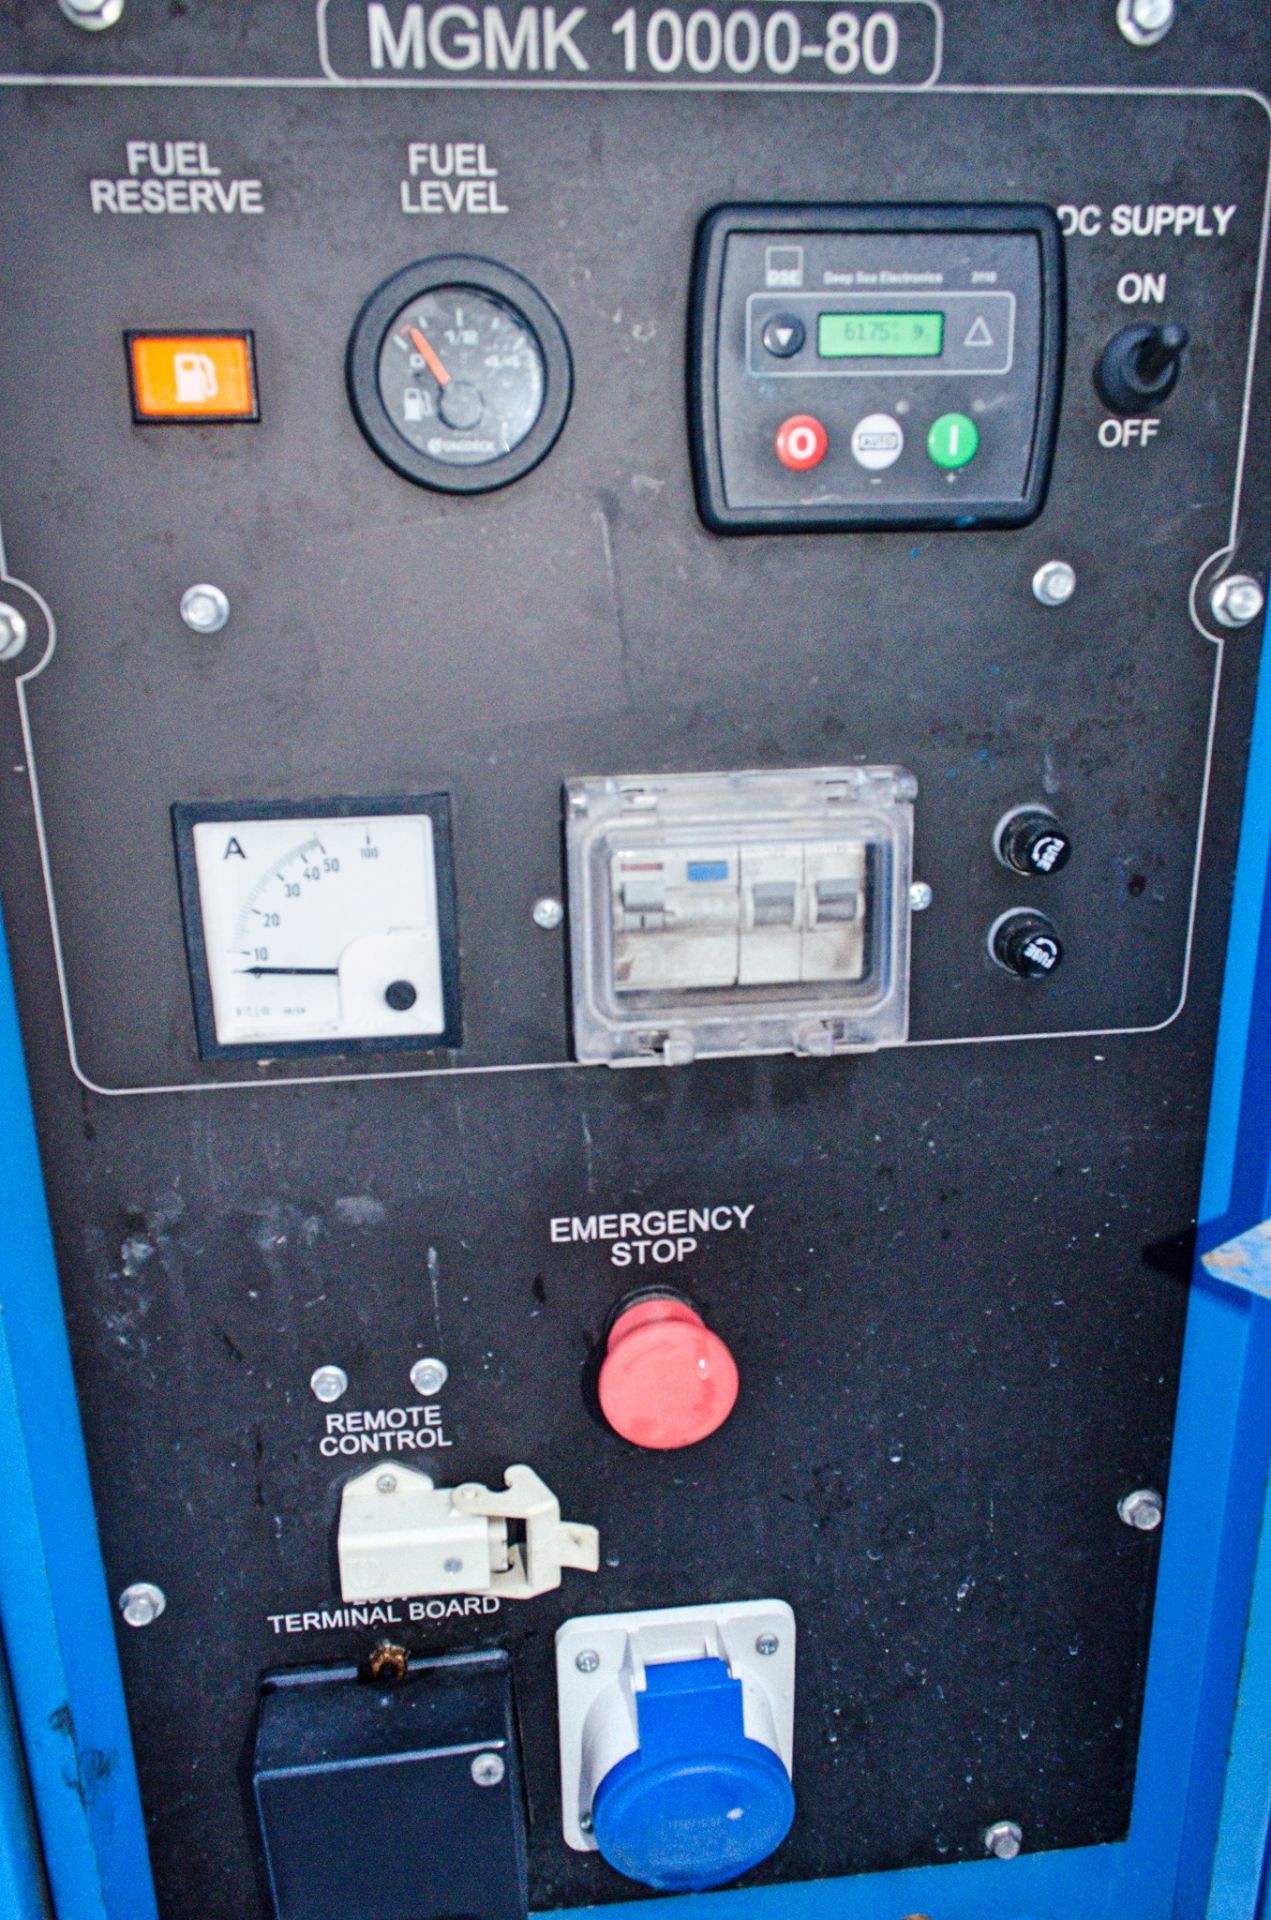 Genset MGMK 10000 10 kva static diesel driven generator Recorded Hours: 6175 MS5047 - Image 5 of 5